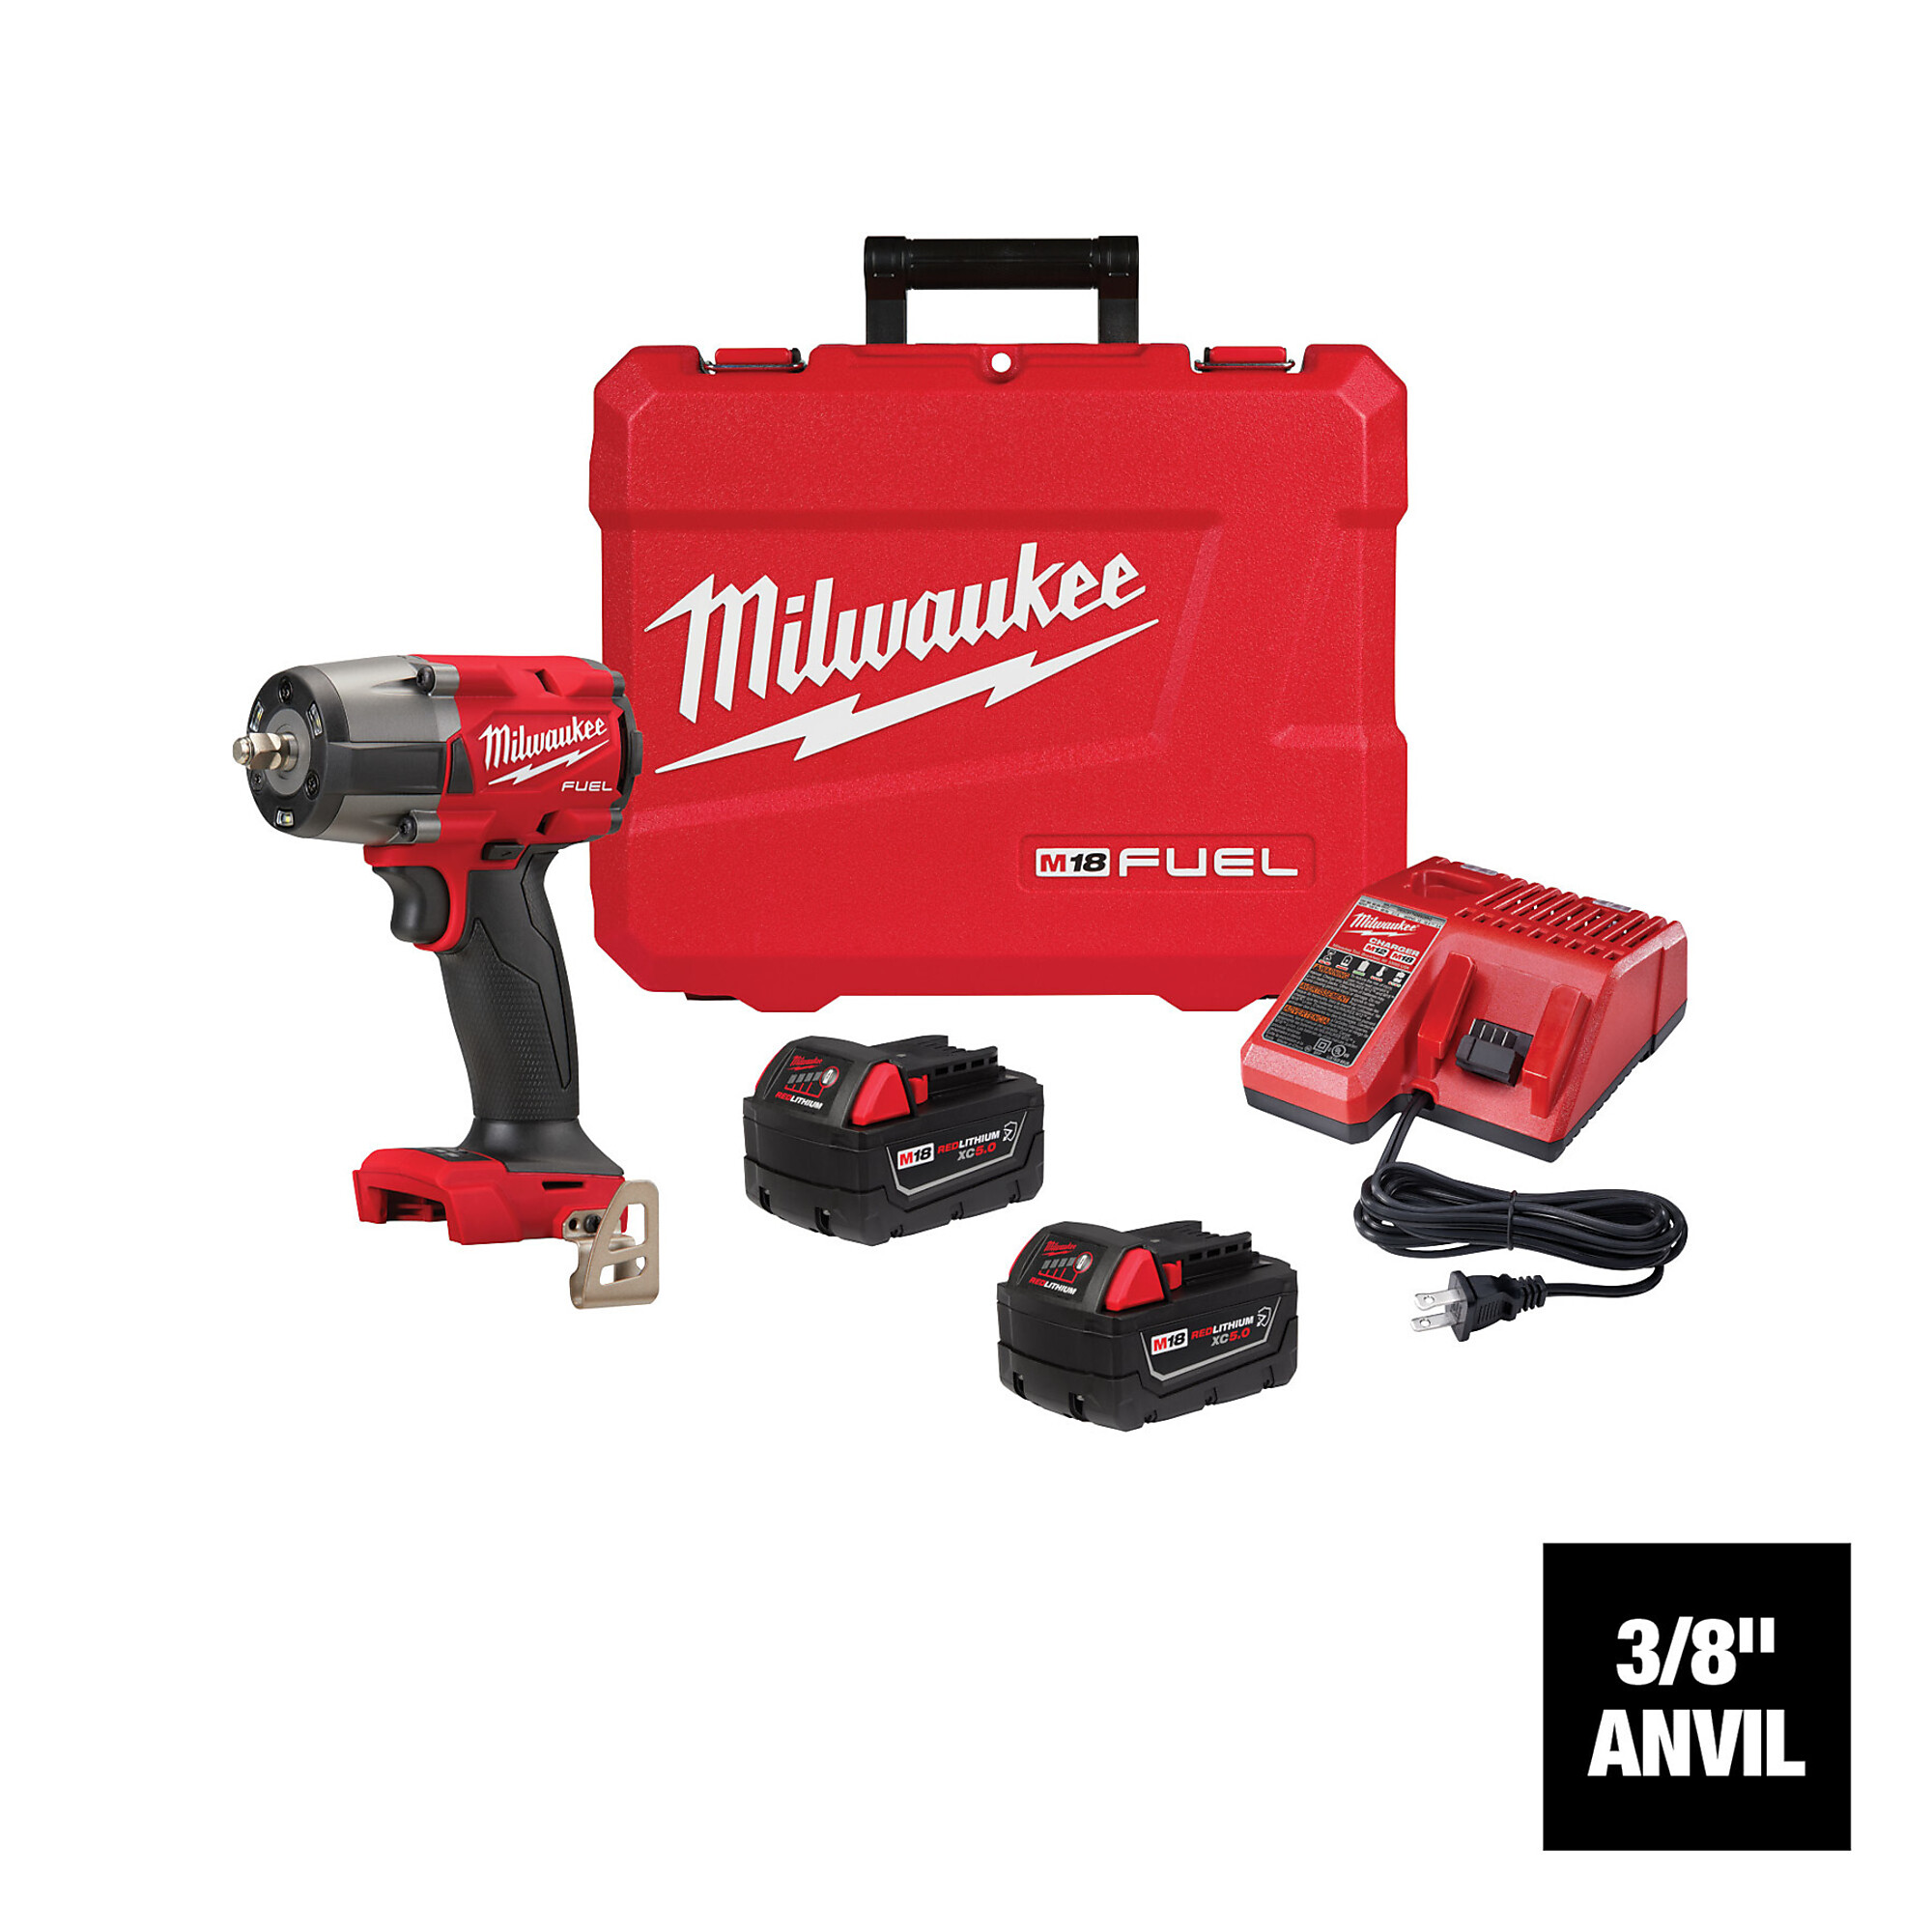 Milwaukee M18 FUEL Mid-Torque Impact Wrench with Friction Ring Kit, 3/8Inch Drive, 600 Ft./Lbs. Torque, Model 2960-22R